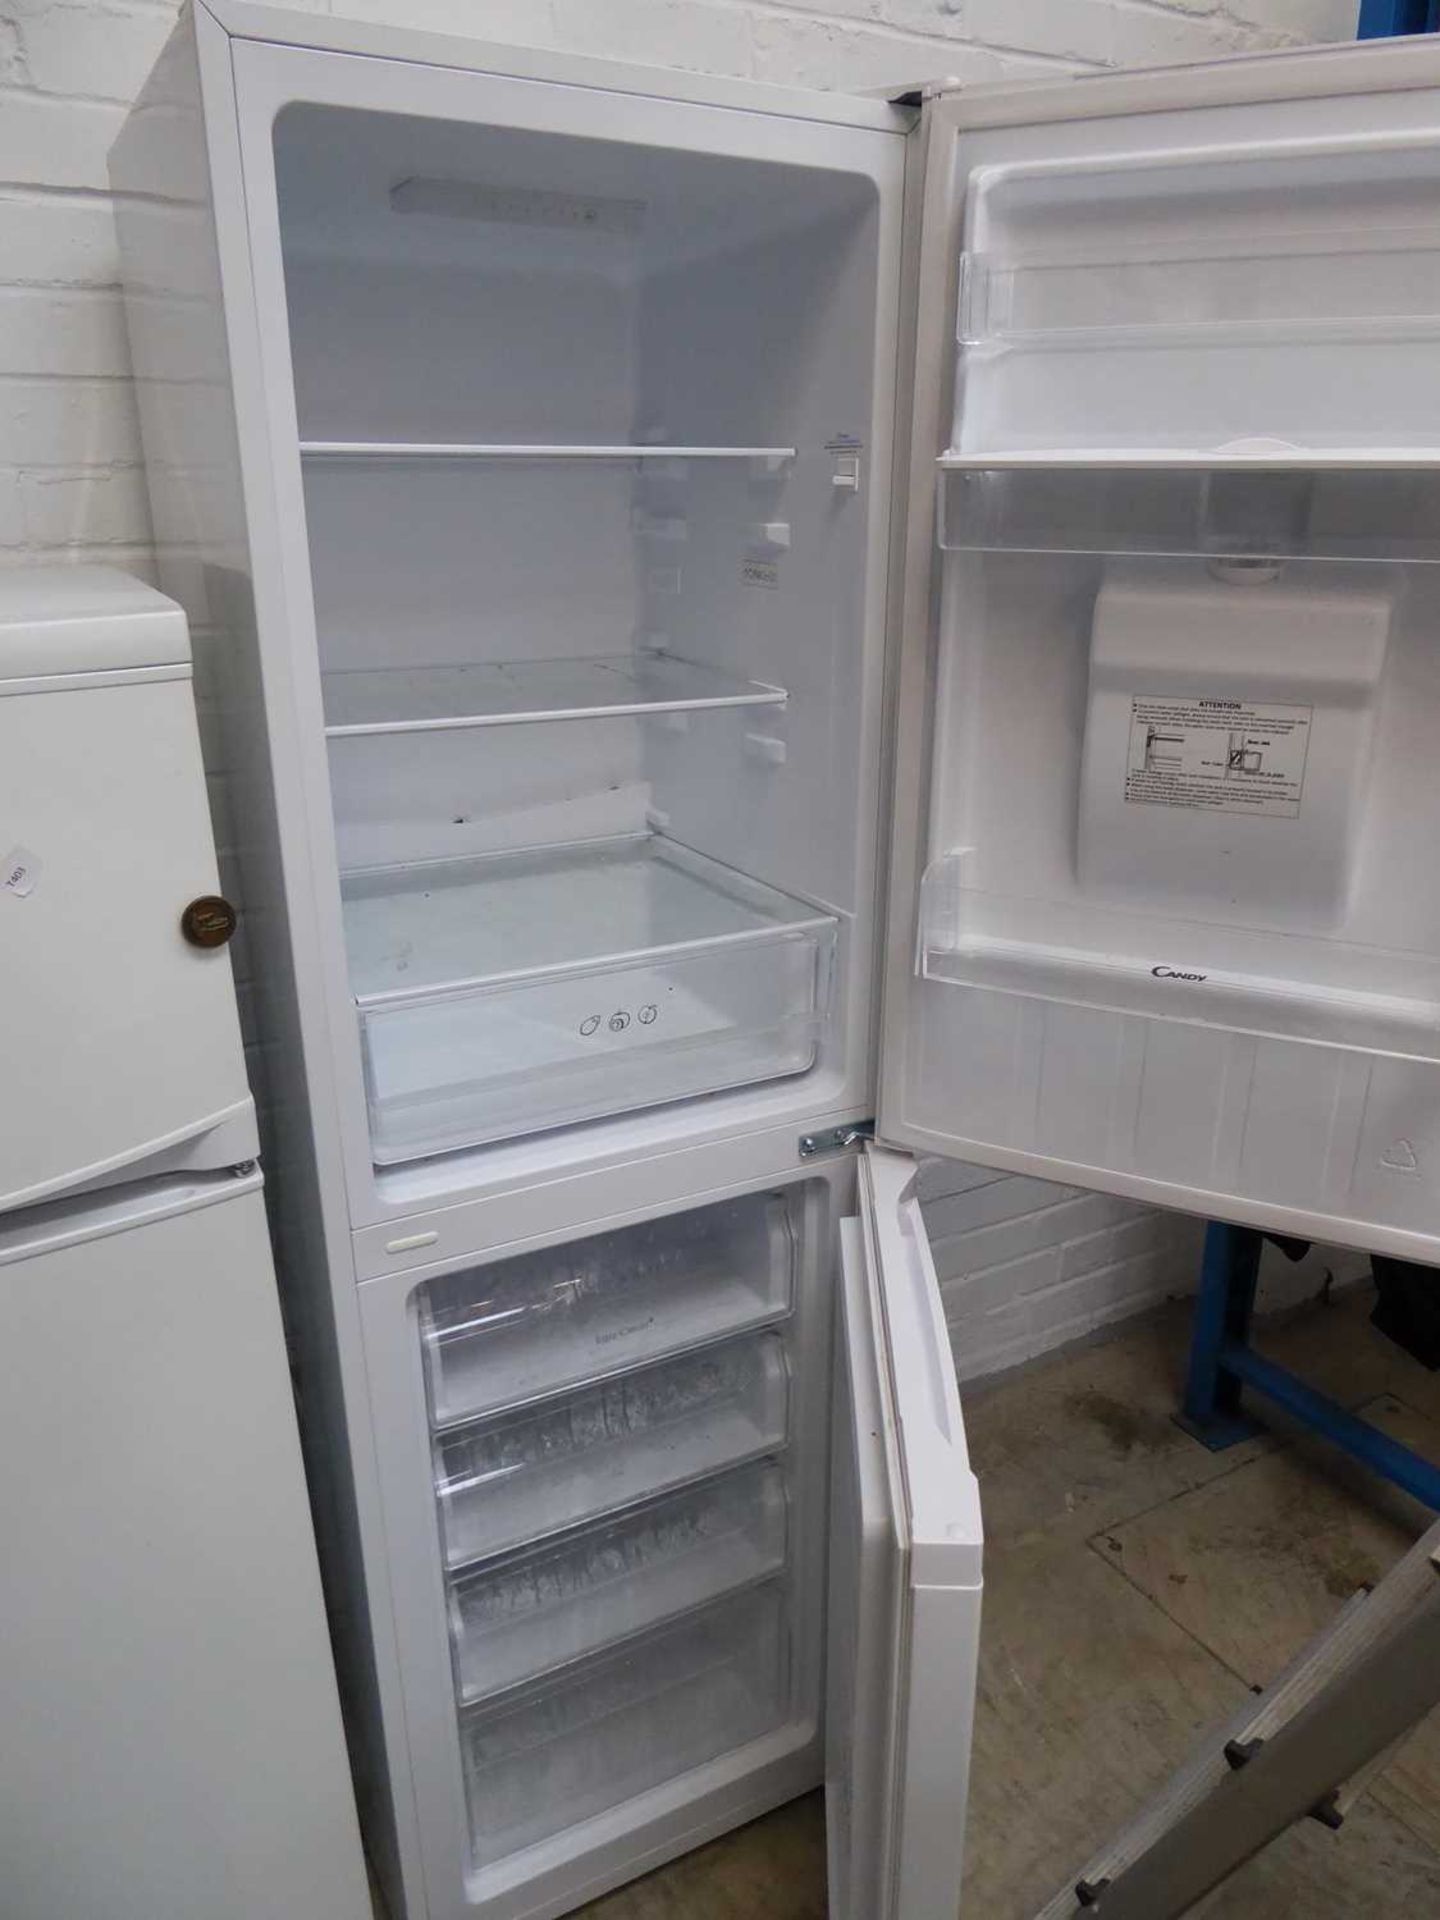 Candy upright fridge freezer with built in water dispenser - Image 2 of 2